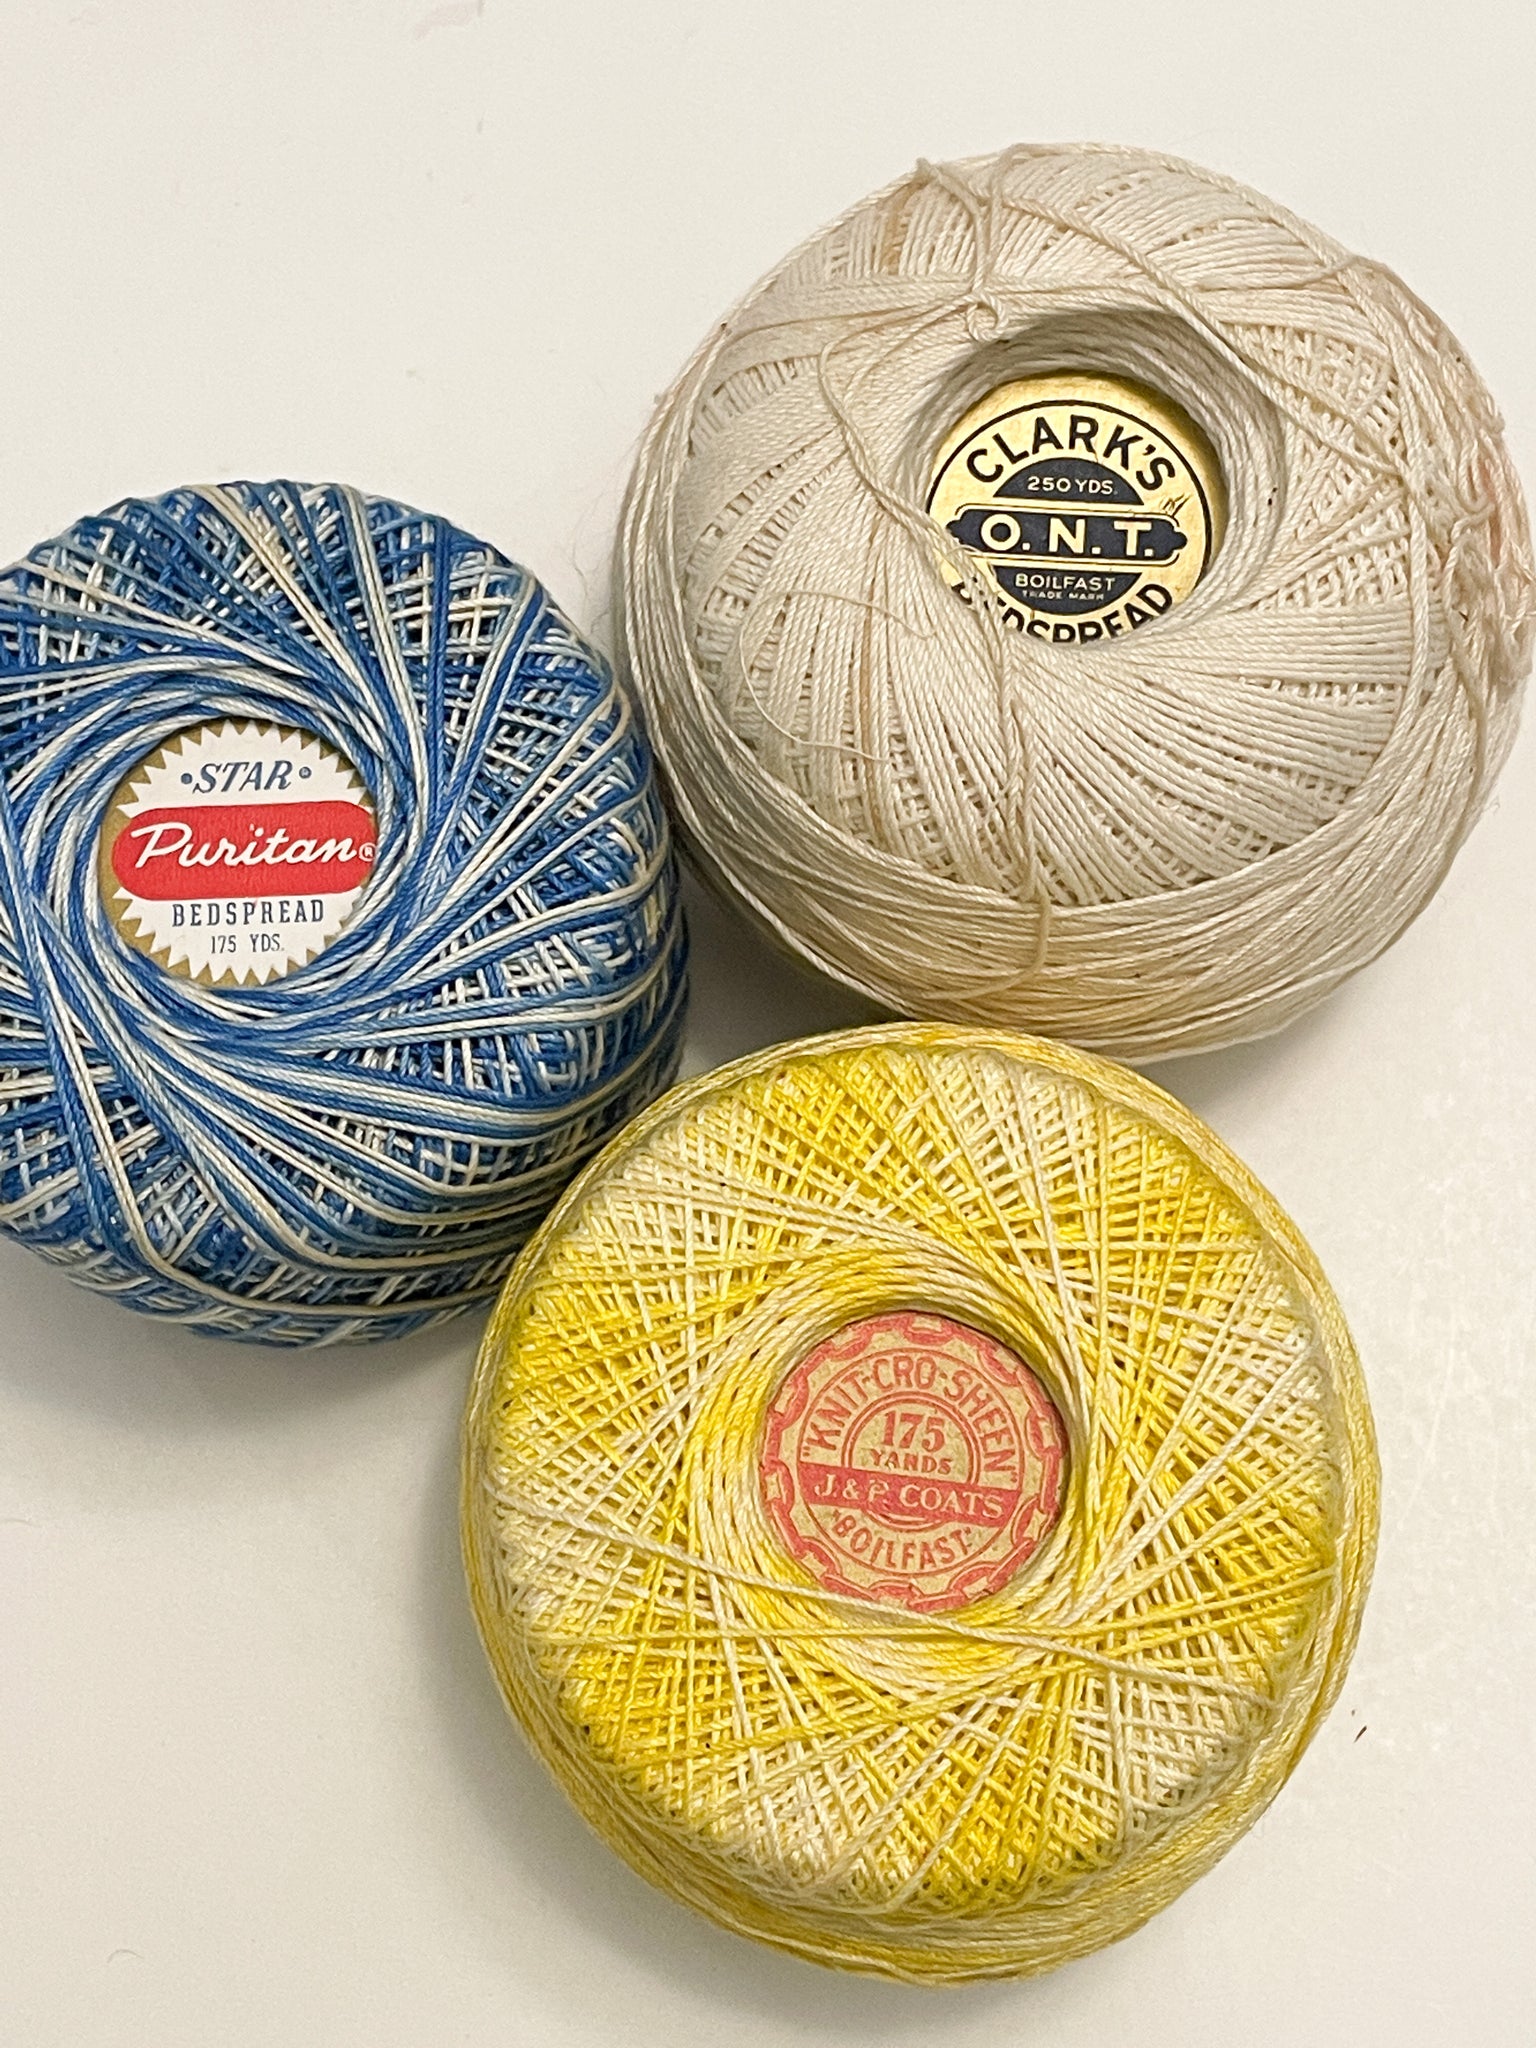 SALE Cotton Crochet Thread Bundle - Variegated Blue, Yellow and Solid Off White